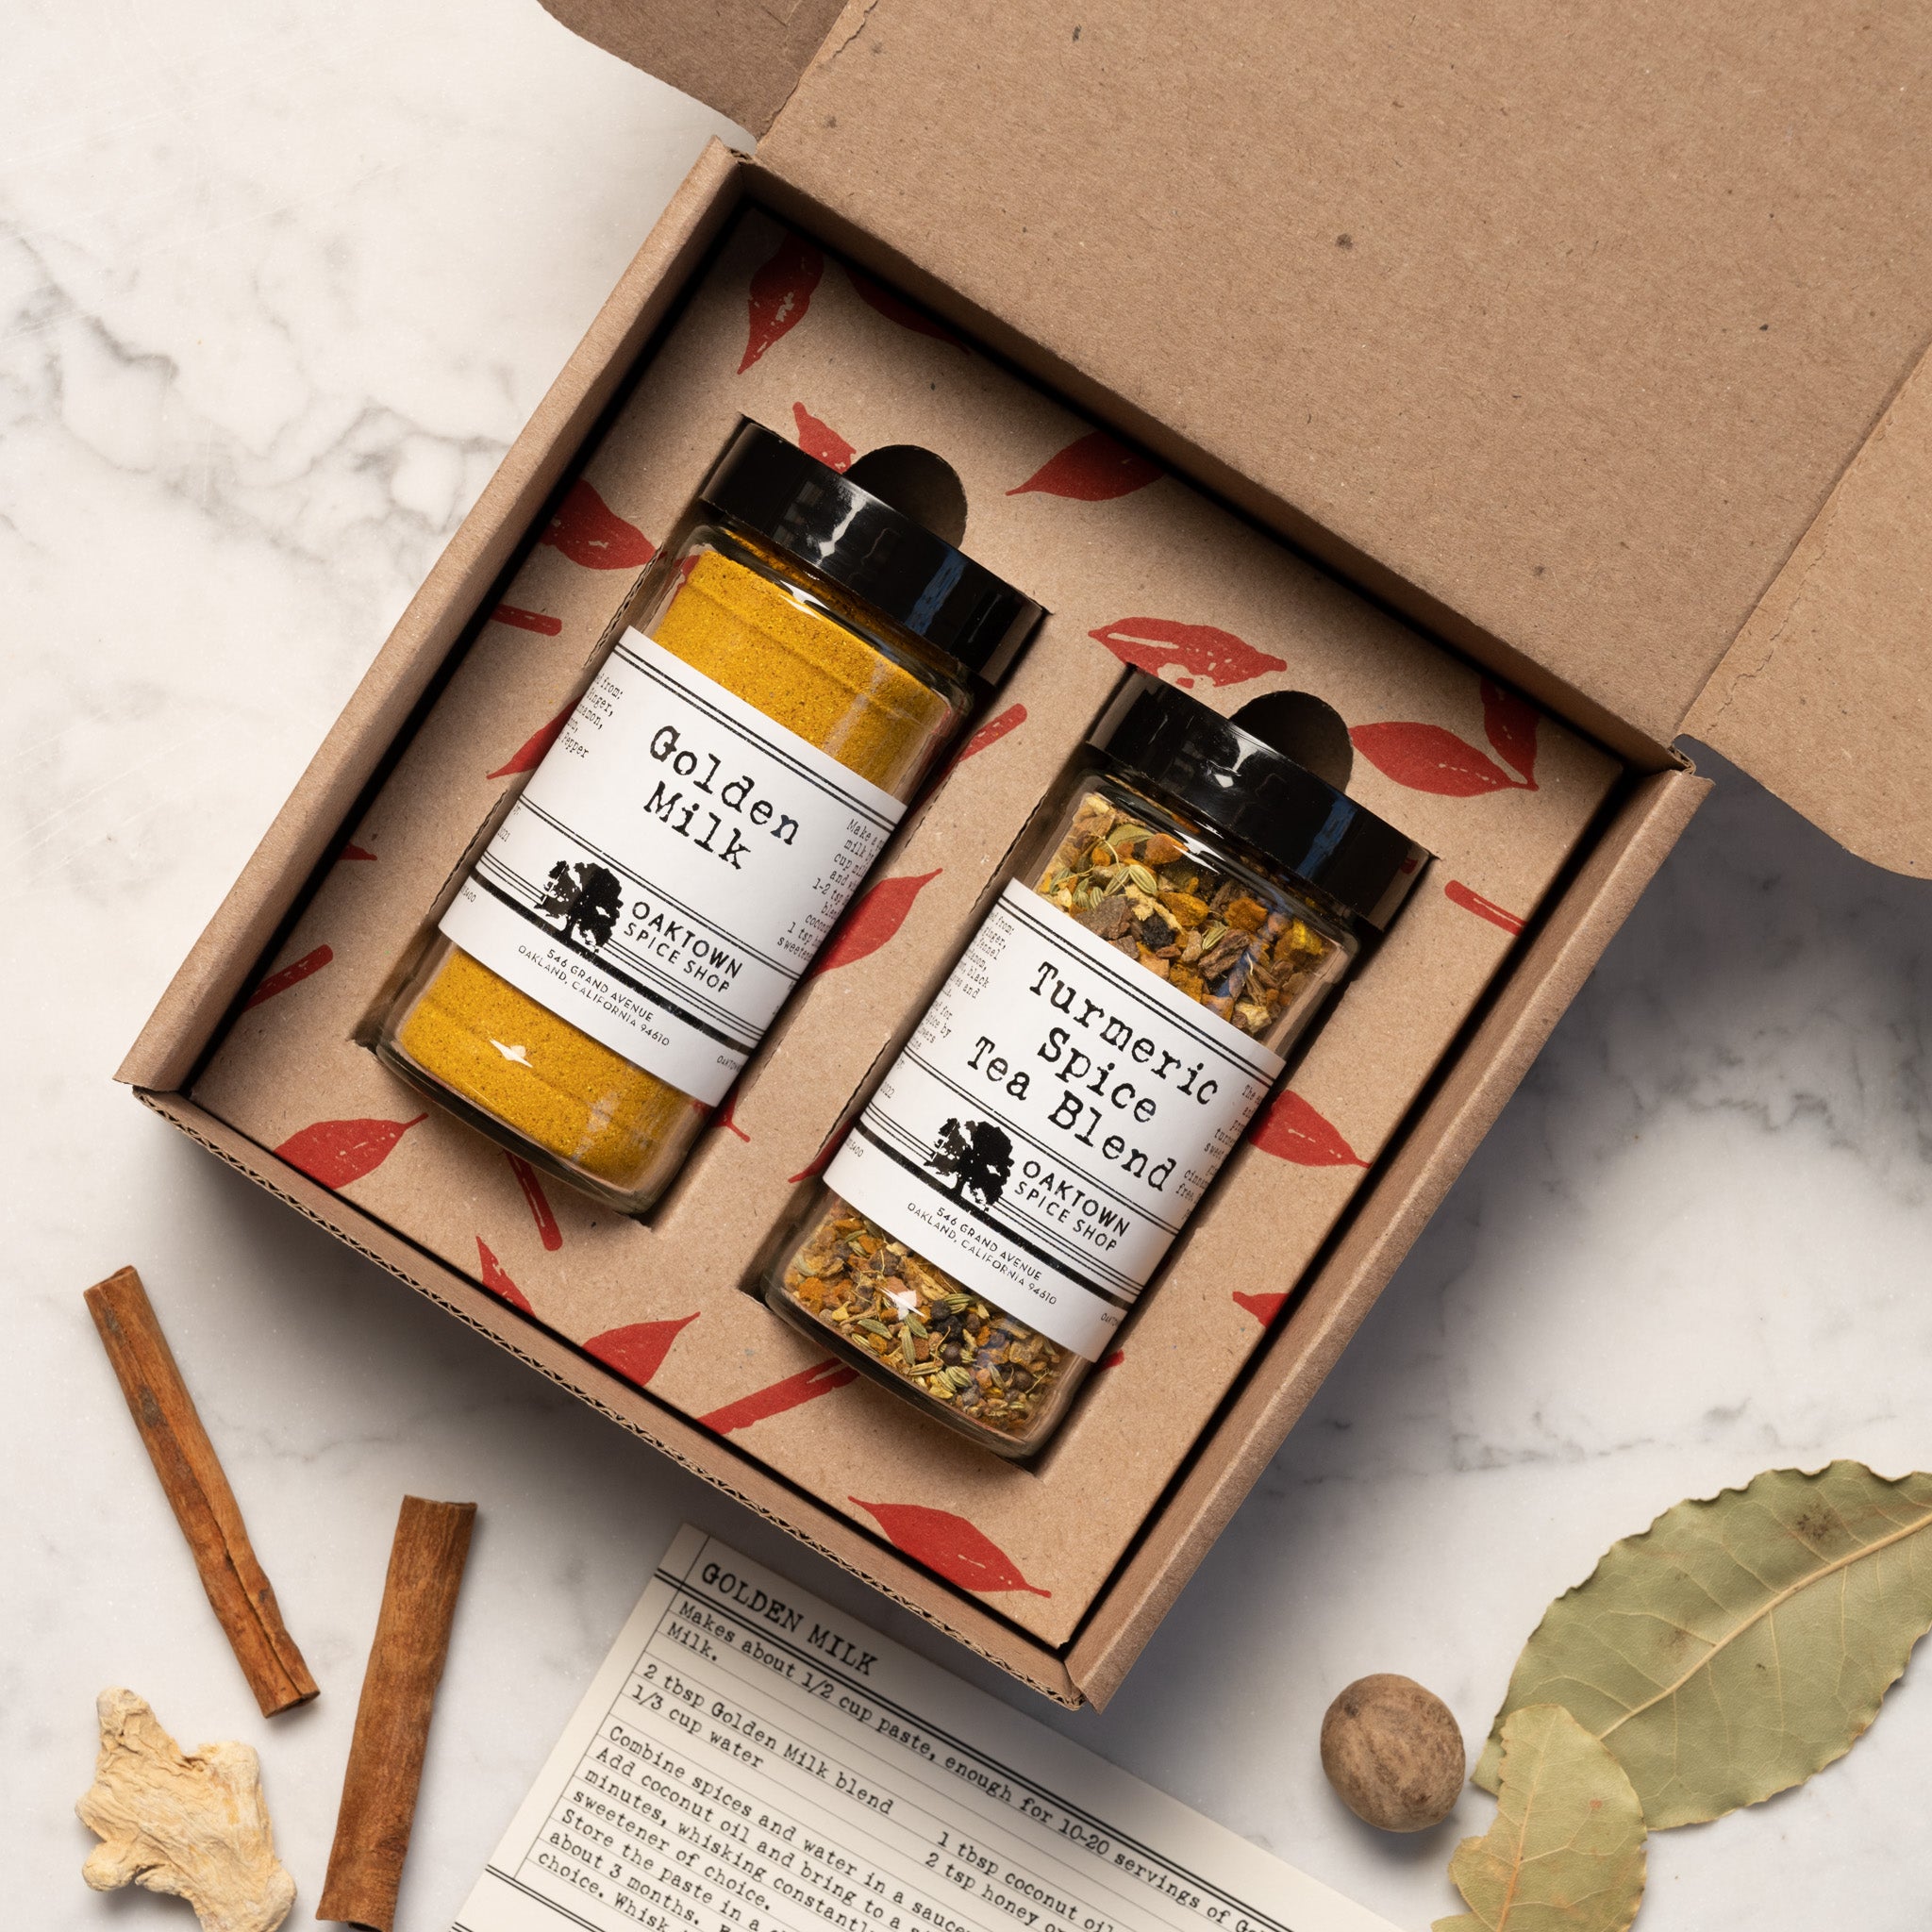 Golden State Turmeric Duo by Oaktown Spice Shop. Turmeric is prized for its anti-inflammatory properties and its earthy, rich flavor. Featuring jars of our Golden Milk blend and Turmeric Spice Tea Blend, this collection is sure to impress any turmeric devotee.